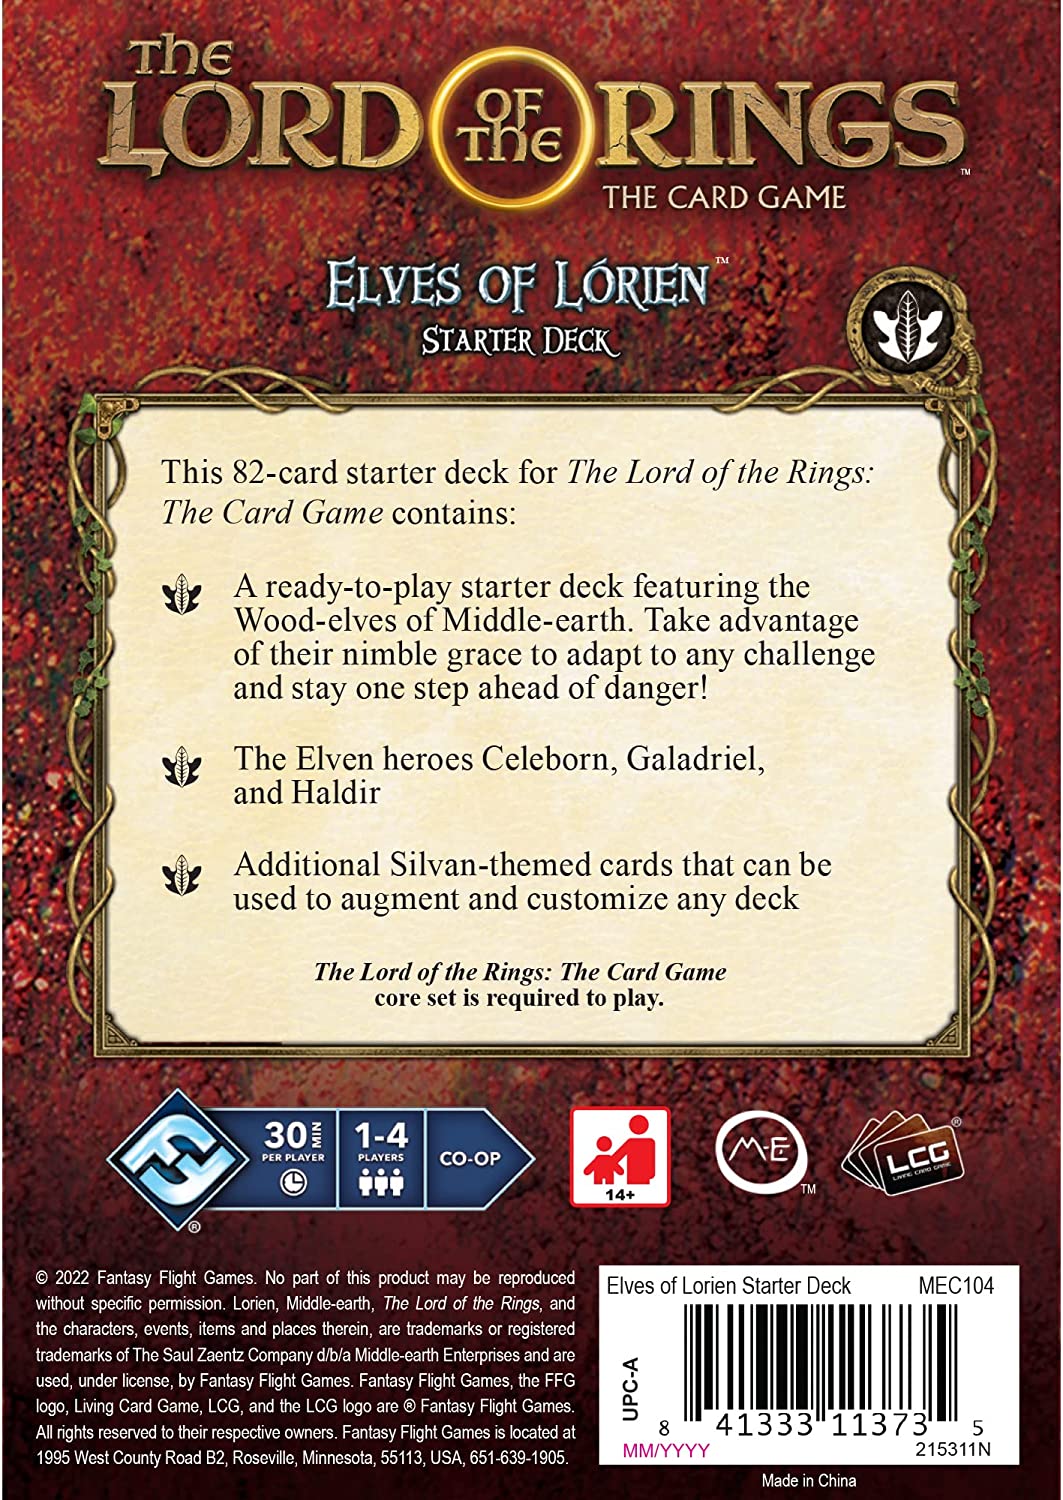 Fantasy Flight Games | The Lord of the Rings LCG: Elves of Lórien Starter Deck | Card Game | Ages 13+ | 1-4 Players | 30-60 Minutes Playing Time